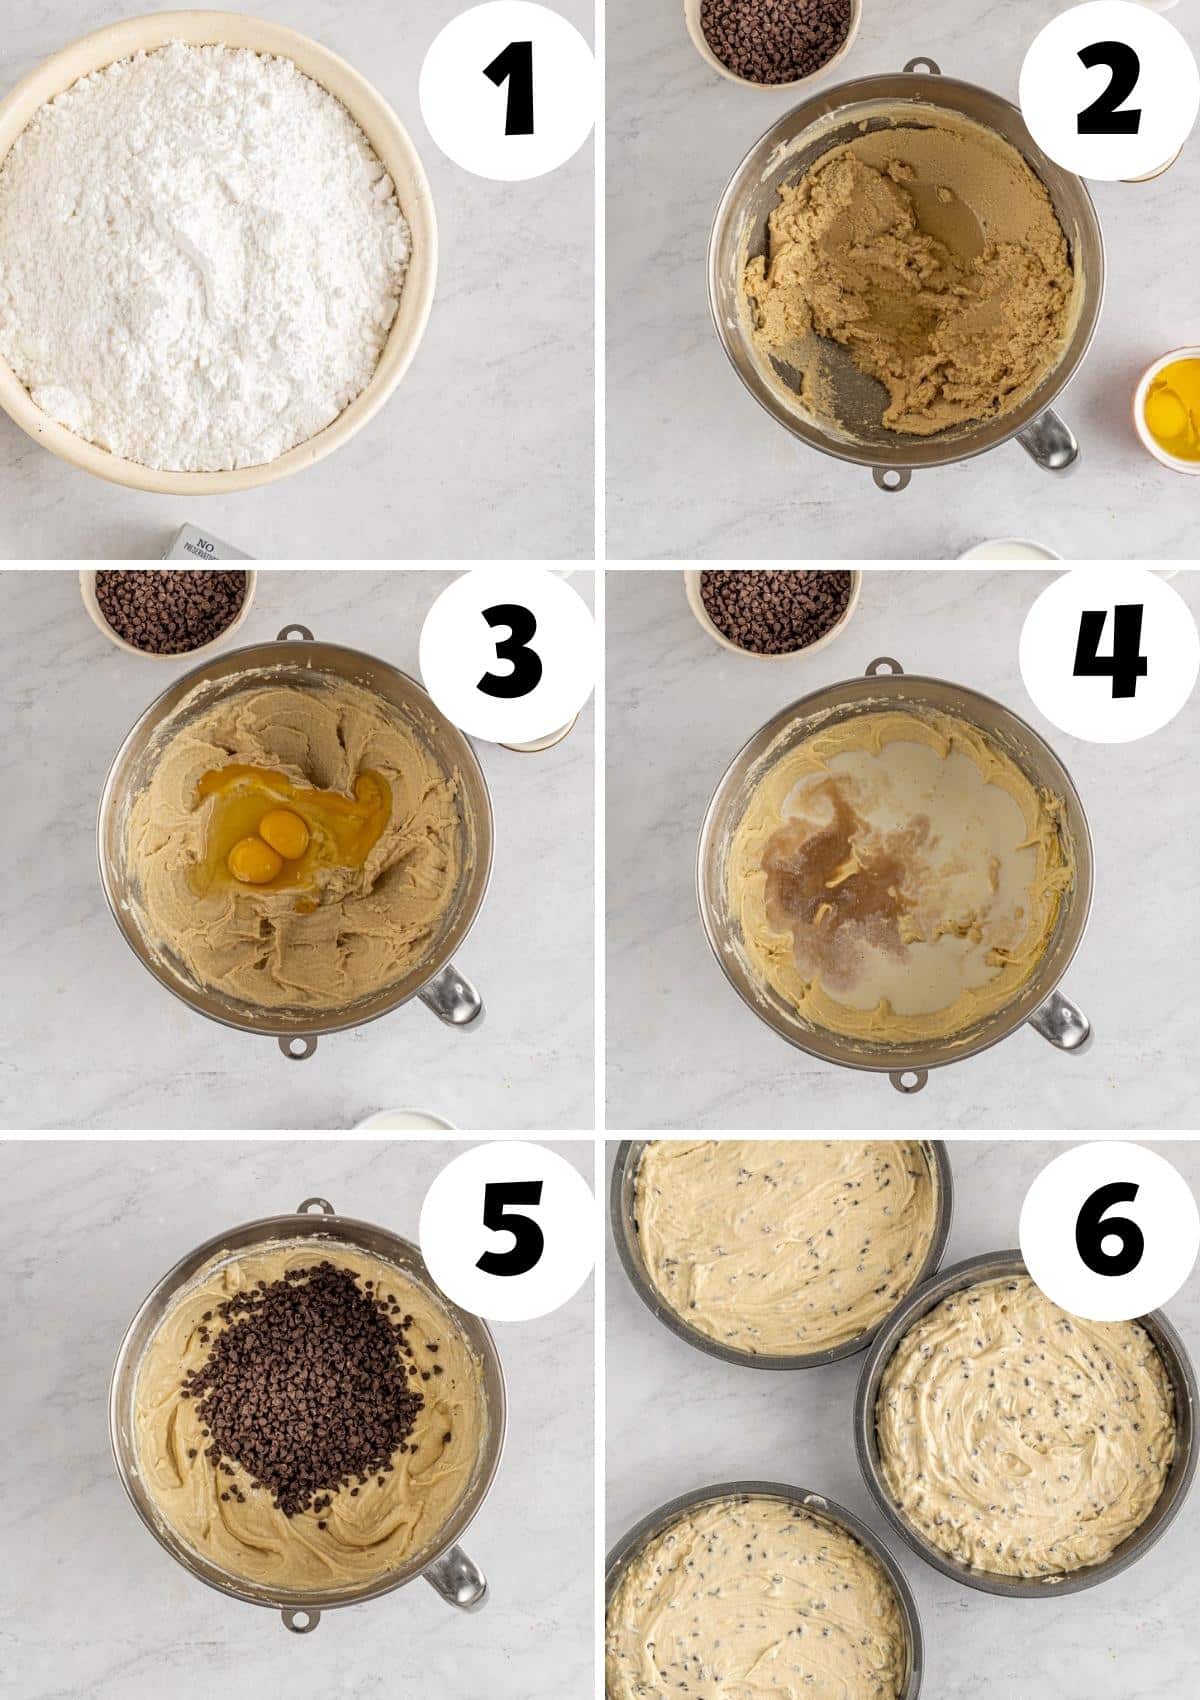 directions for mixing chocolate chip cookie cake batter and dividing into three separate cake pans for baking